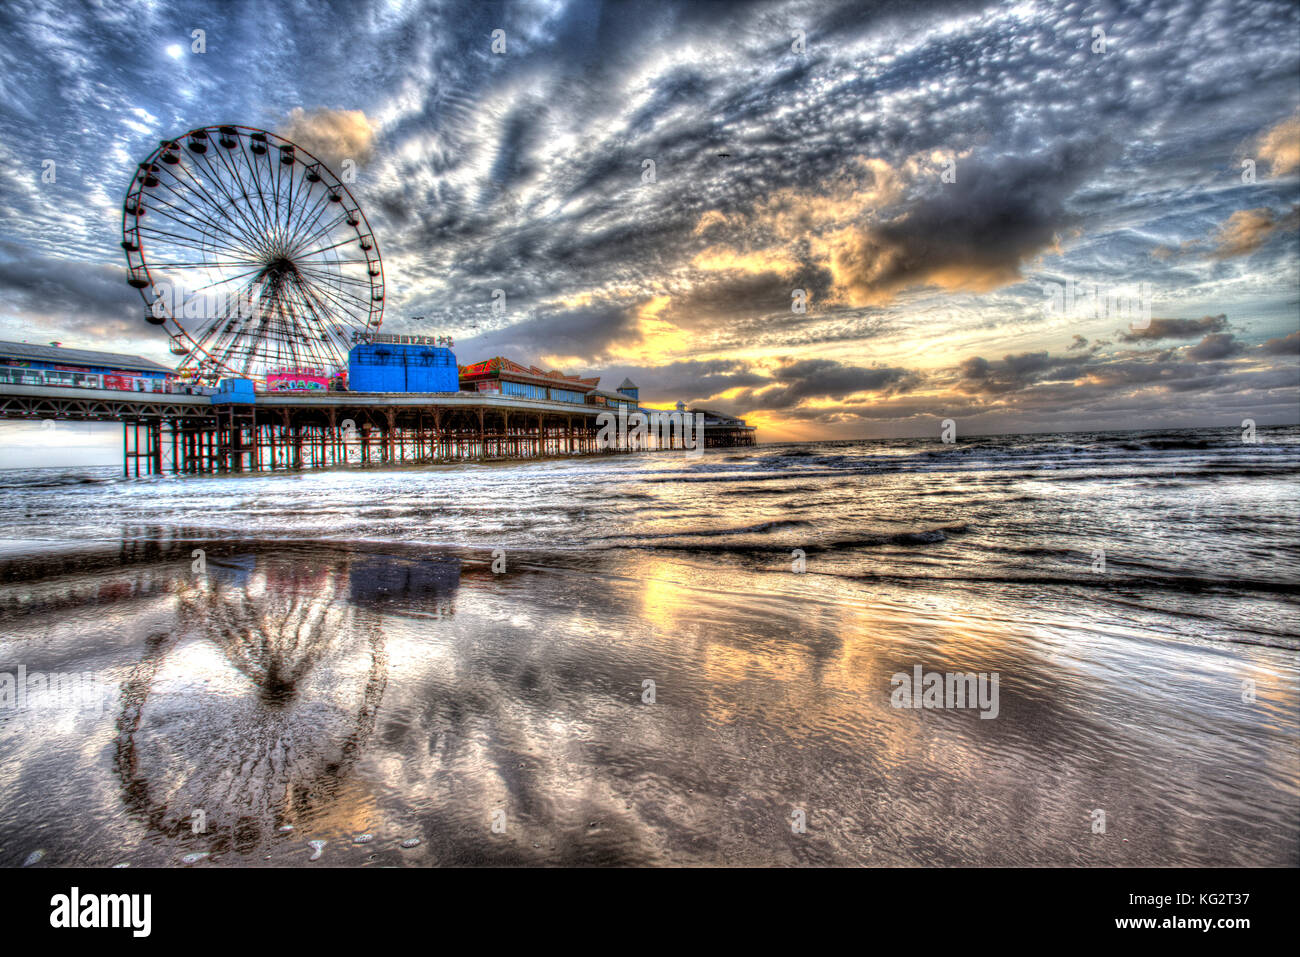 Town of Blackpool, England. Picturesque dusk view of Blackpool’s Central Pier. Completed in 1868, the Victorian pier was constructed as an attraction  Stock Photo